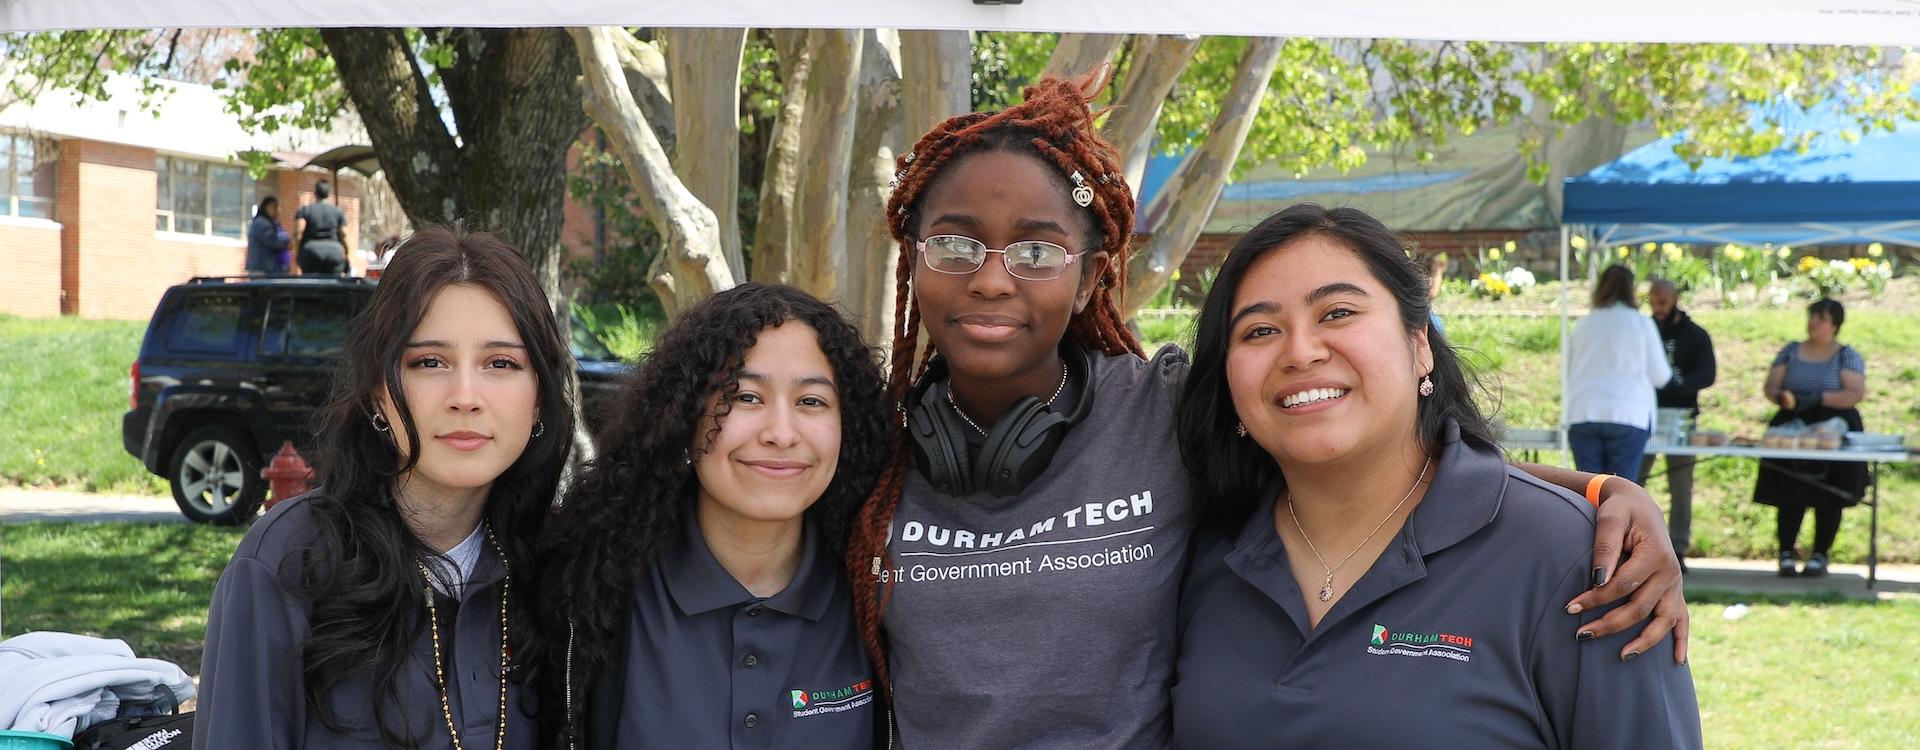 This image features four members of the Student Government Association standing outside smiling. They are outside during a Durham Tech Spring Fling event.